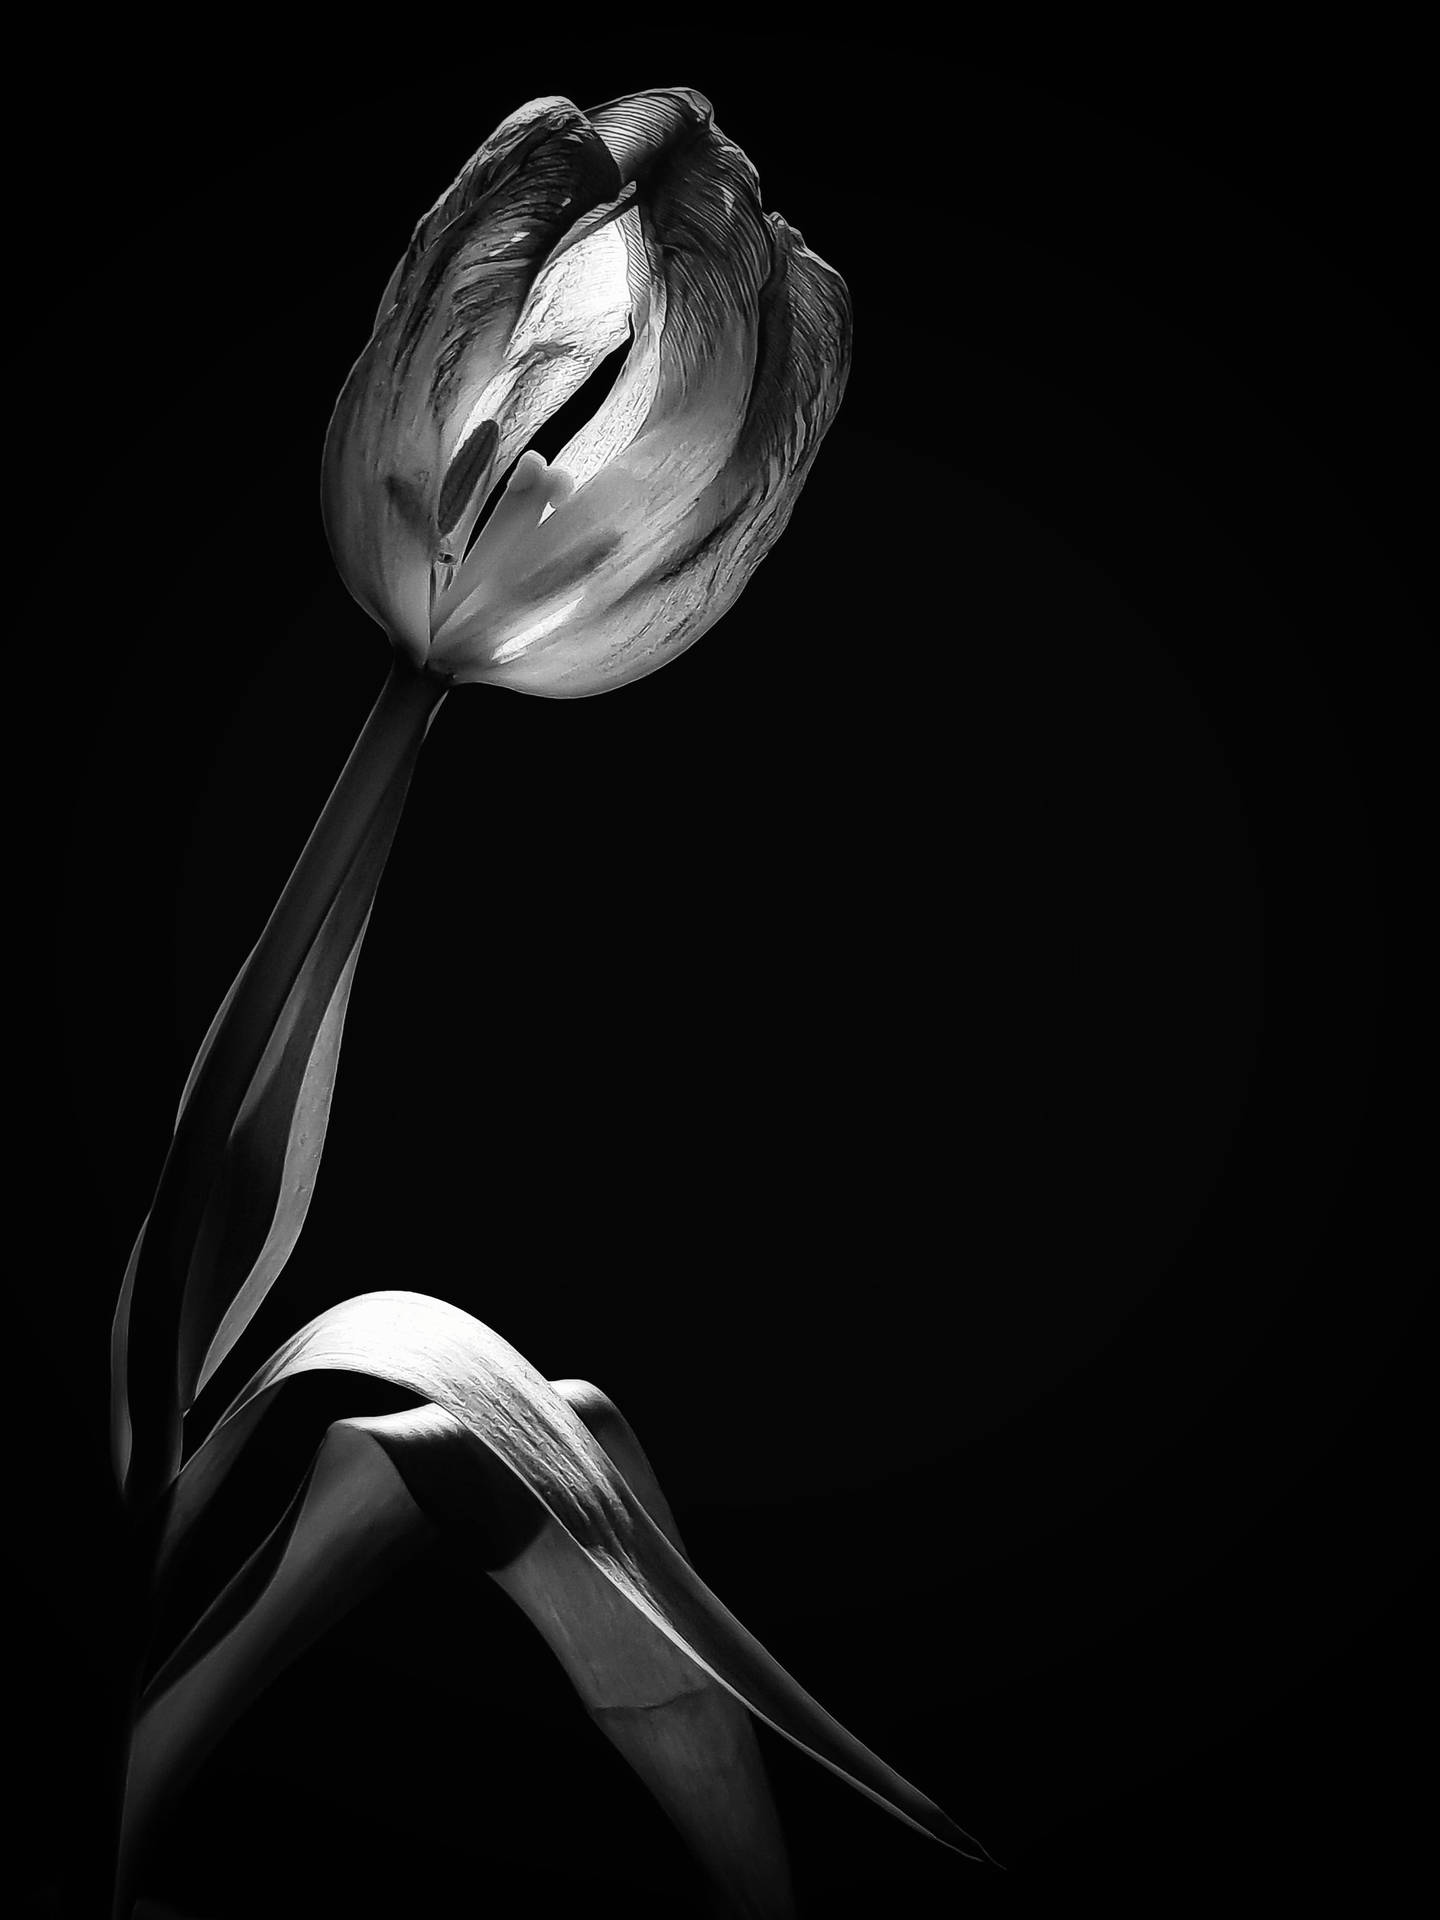 Black And White Flower Closed Background